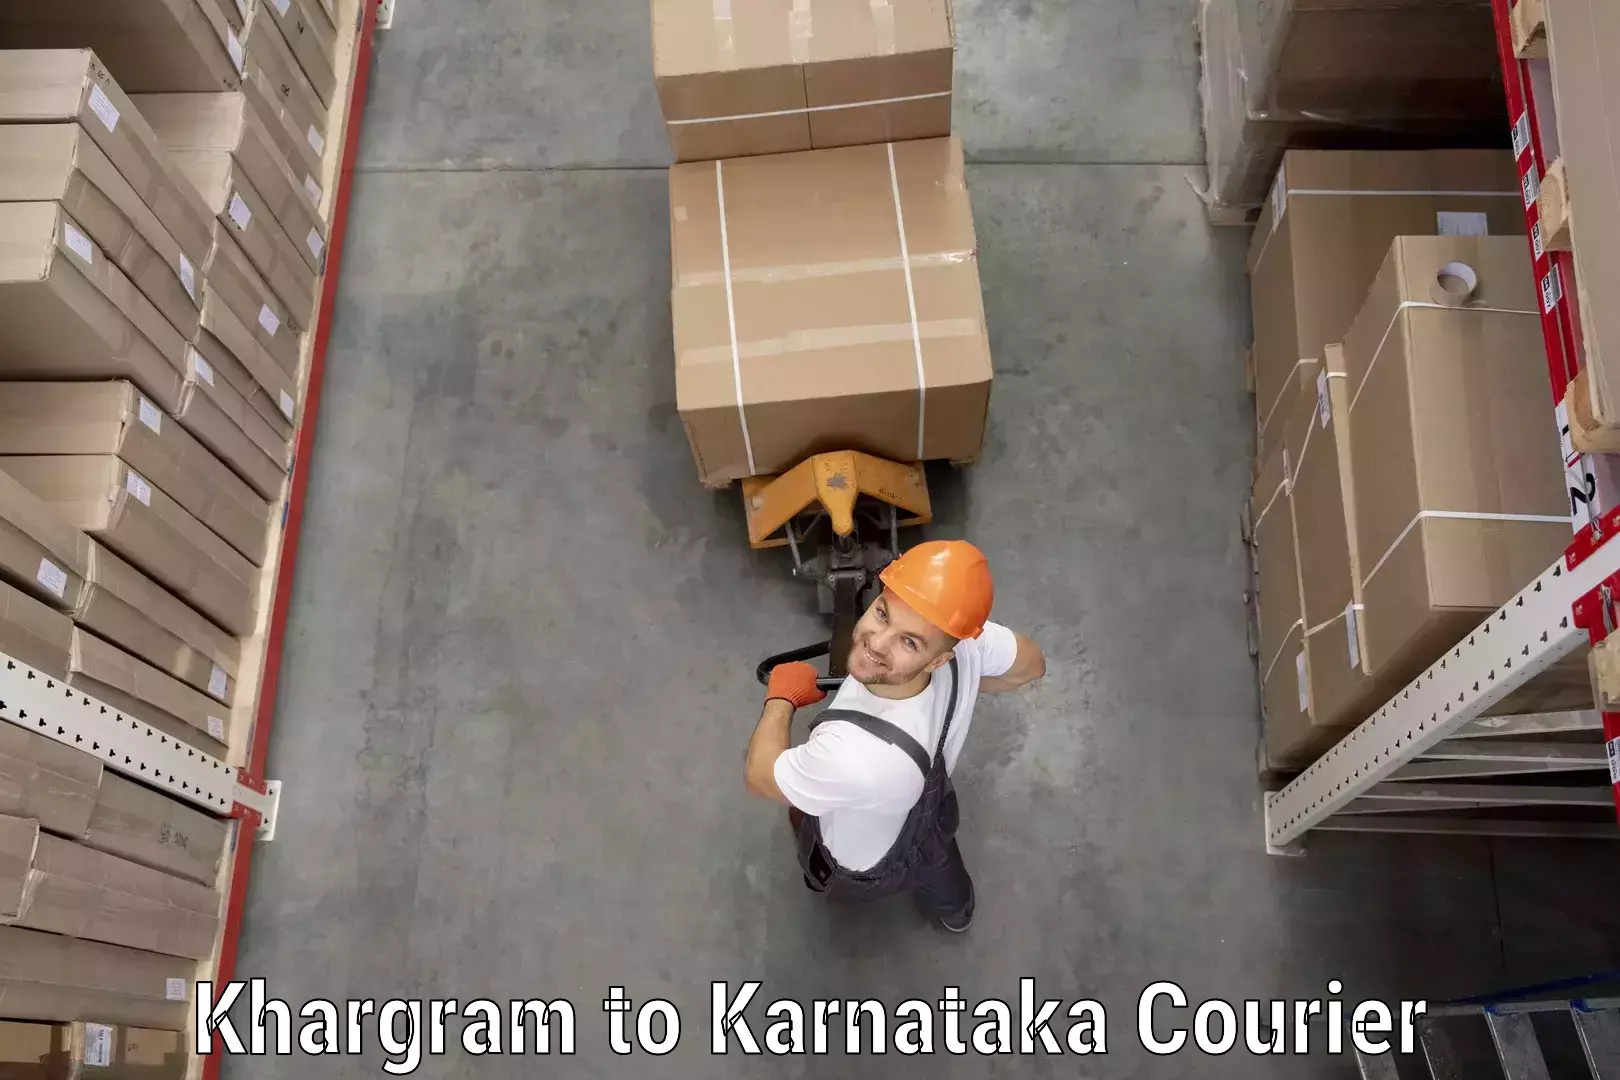 Local delivery service Khargram to Mangalore Port